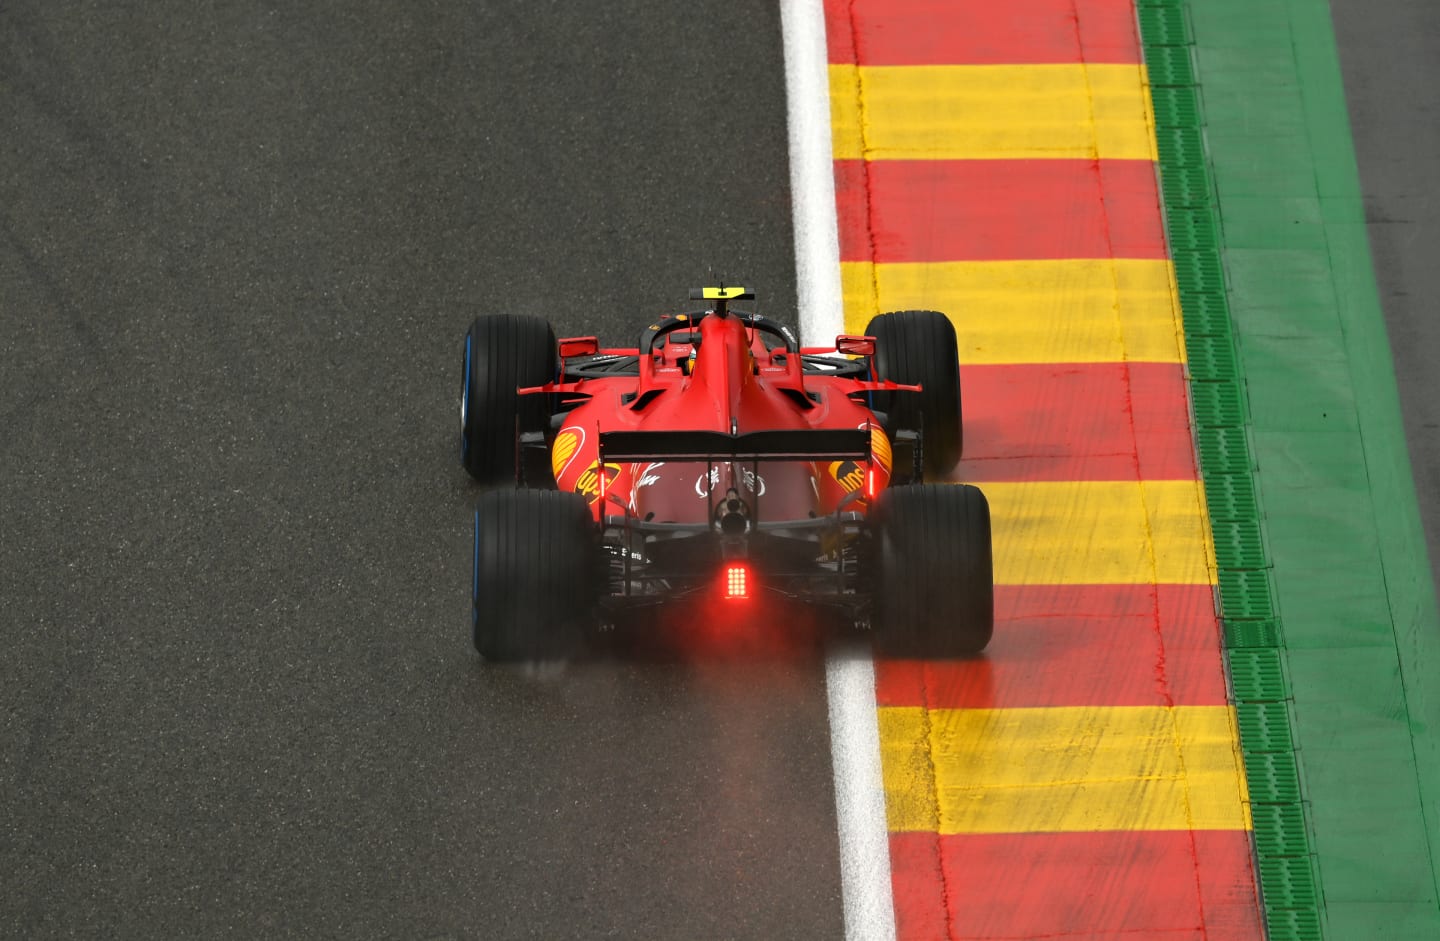 SPA, BELGIUM - AUGUST 28: Carlos Sainz of Spain driving the (55) Scuderia Ferrari SF21 during qualifying ahead of the F1 Grand Prix of Belgium at Circuit de Spa-Francorchamps on August 28, 2021 in Spa, Belgium. (Photo by Dan Mullan/Getty Images)